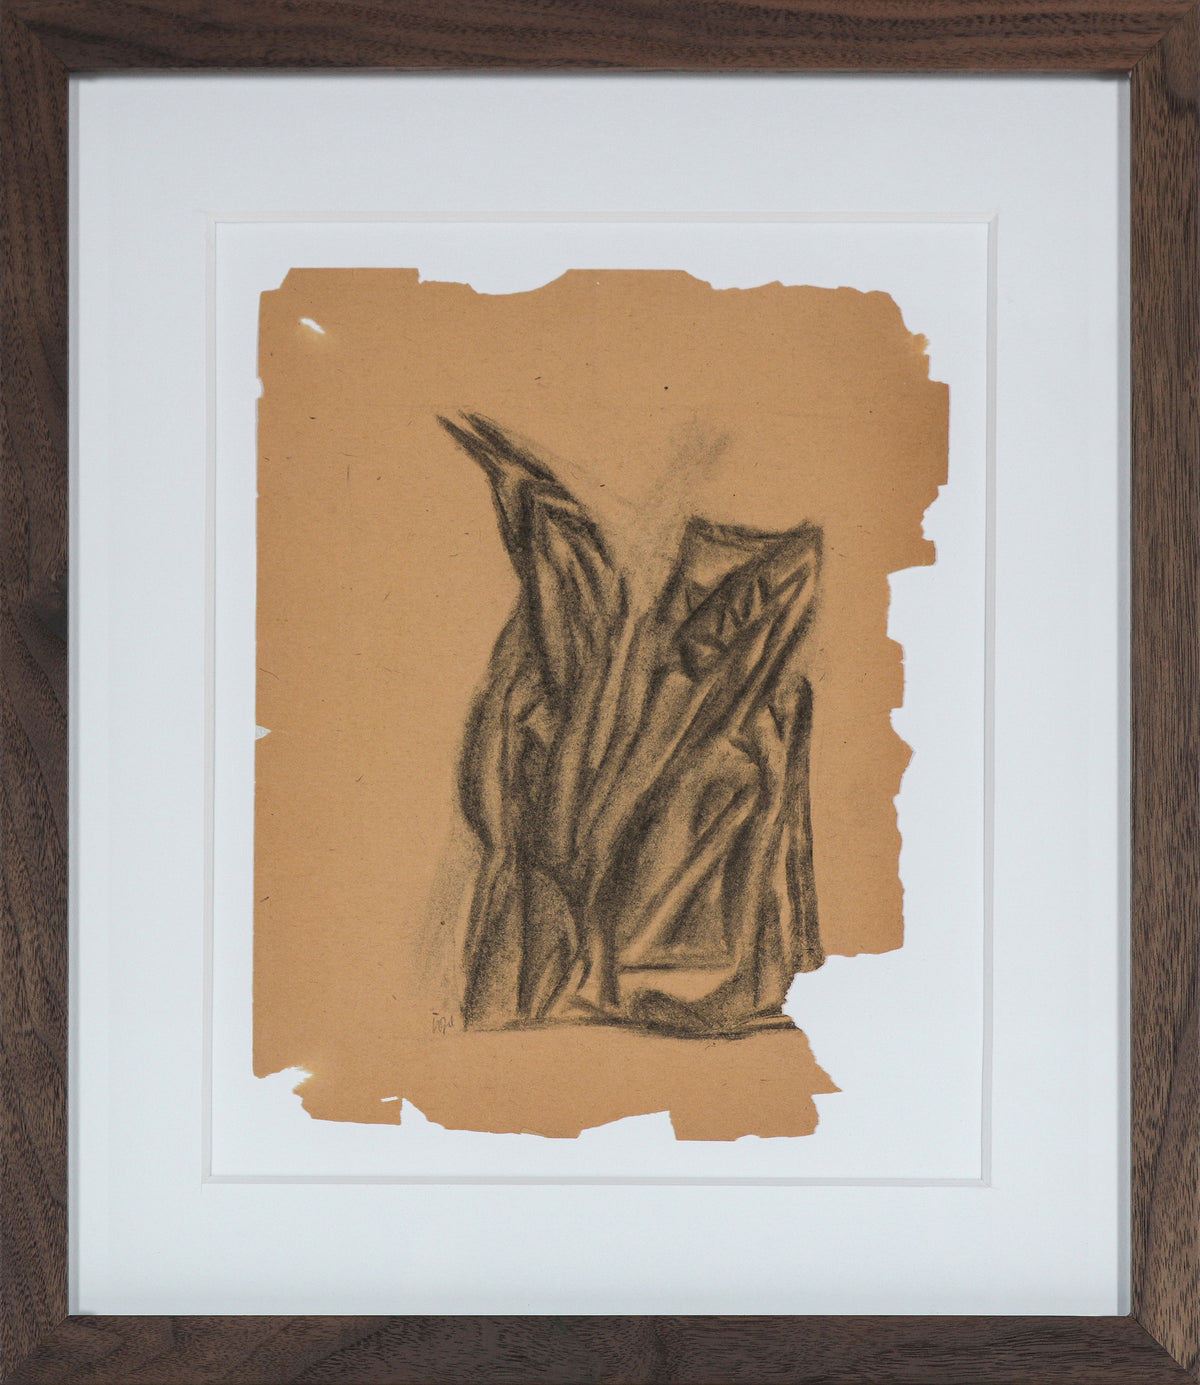 Geometric Abstracted Reaching Figures &lt;br&gt;1903s Charcoal &lt;br&gt;&lt;br&gt;#14227